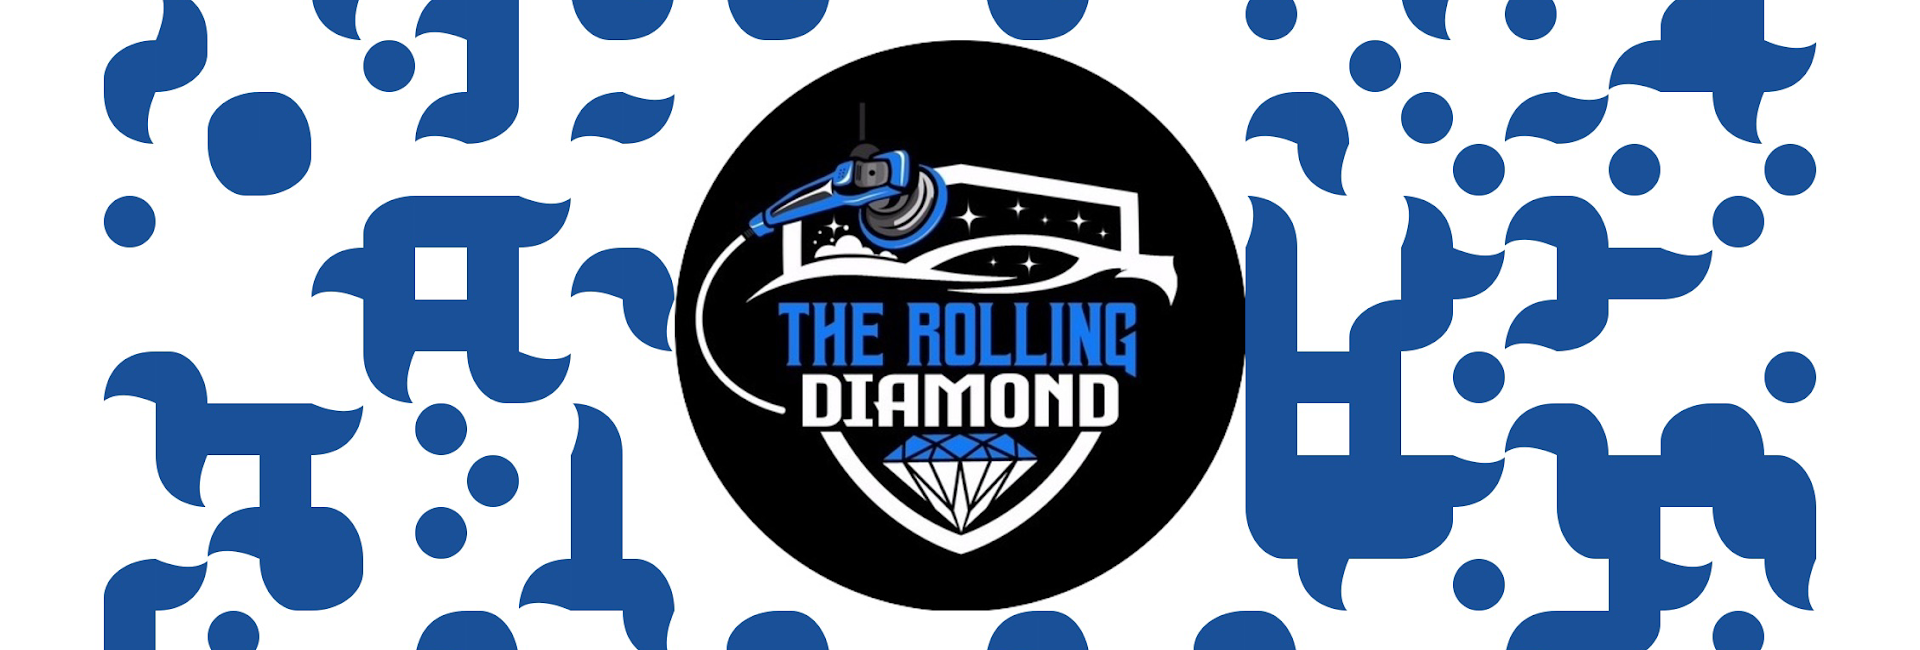 The Rolling Diamond Mobile Detailing 6